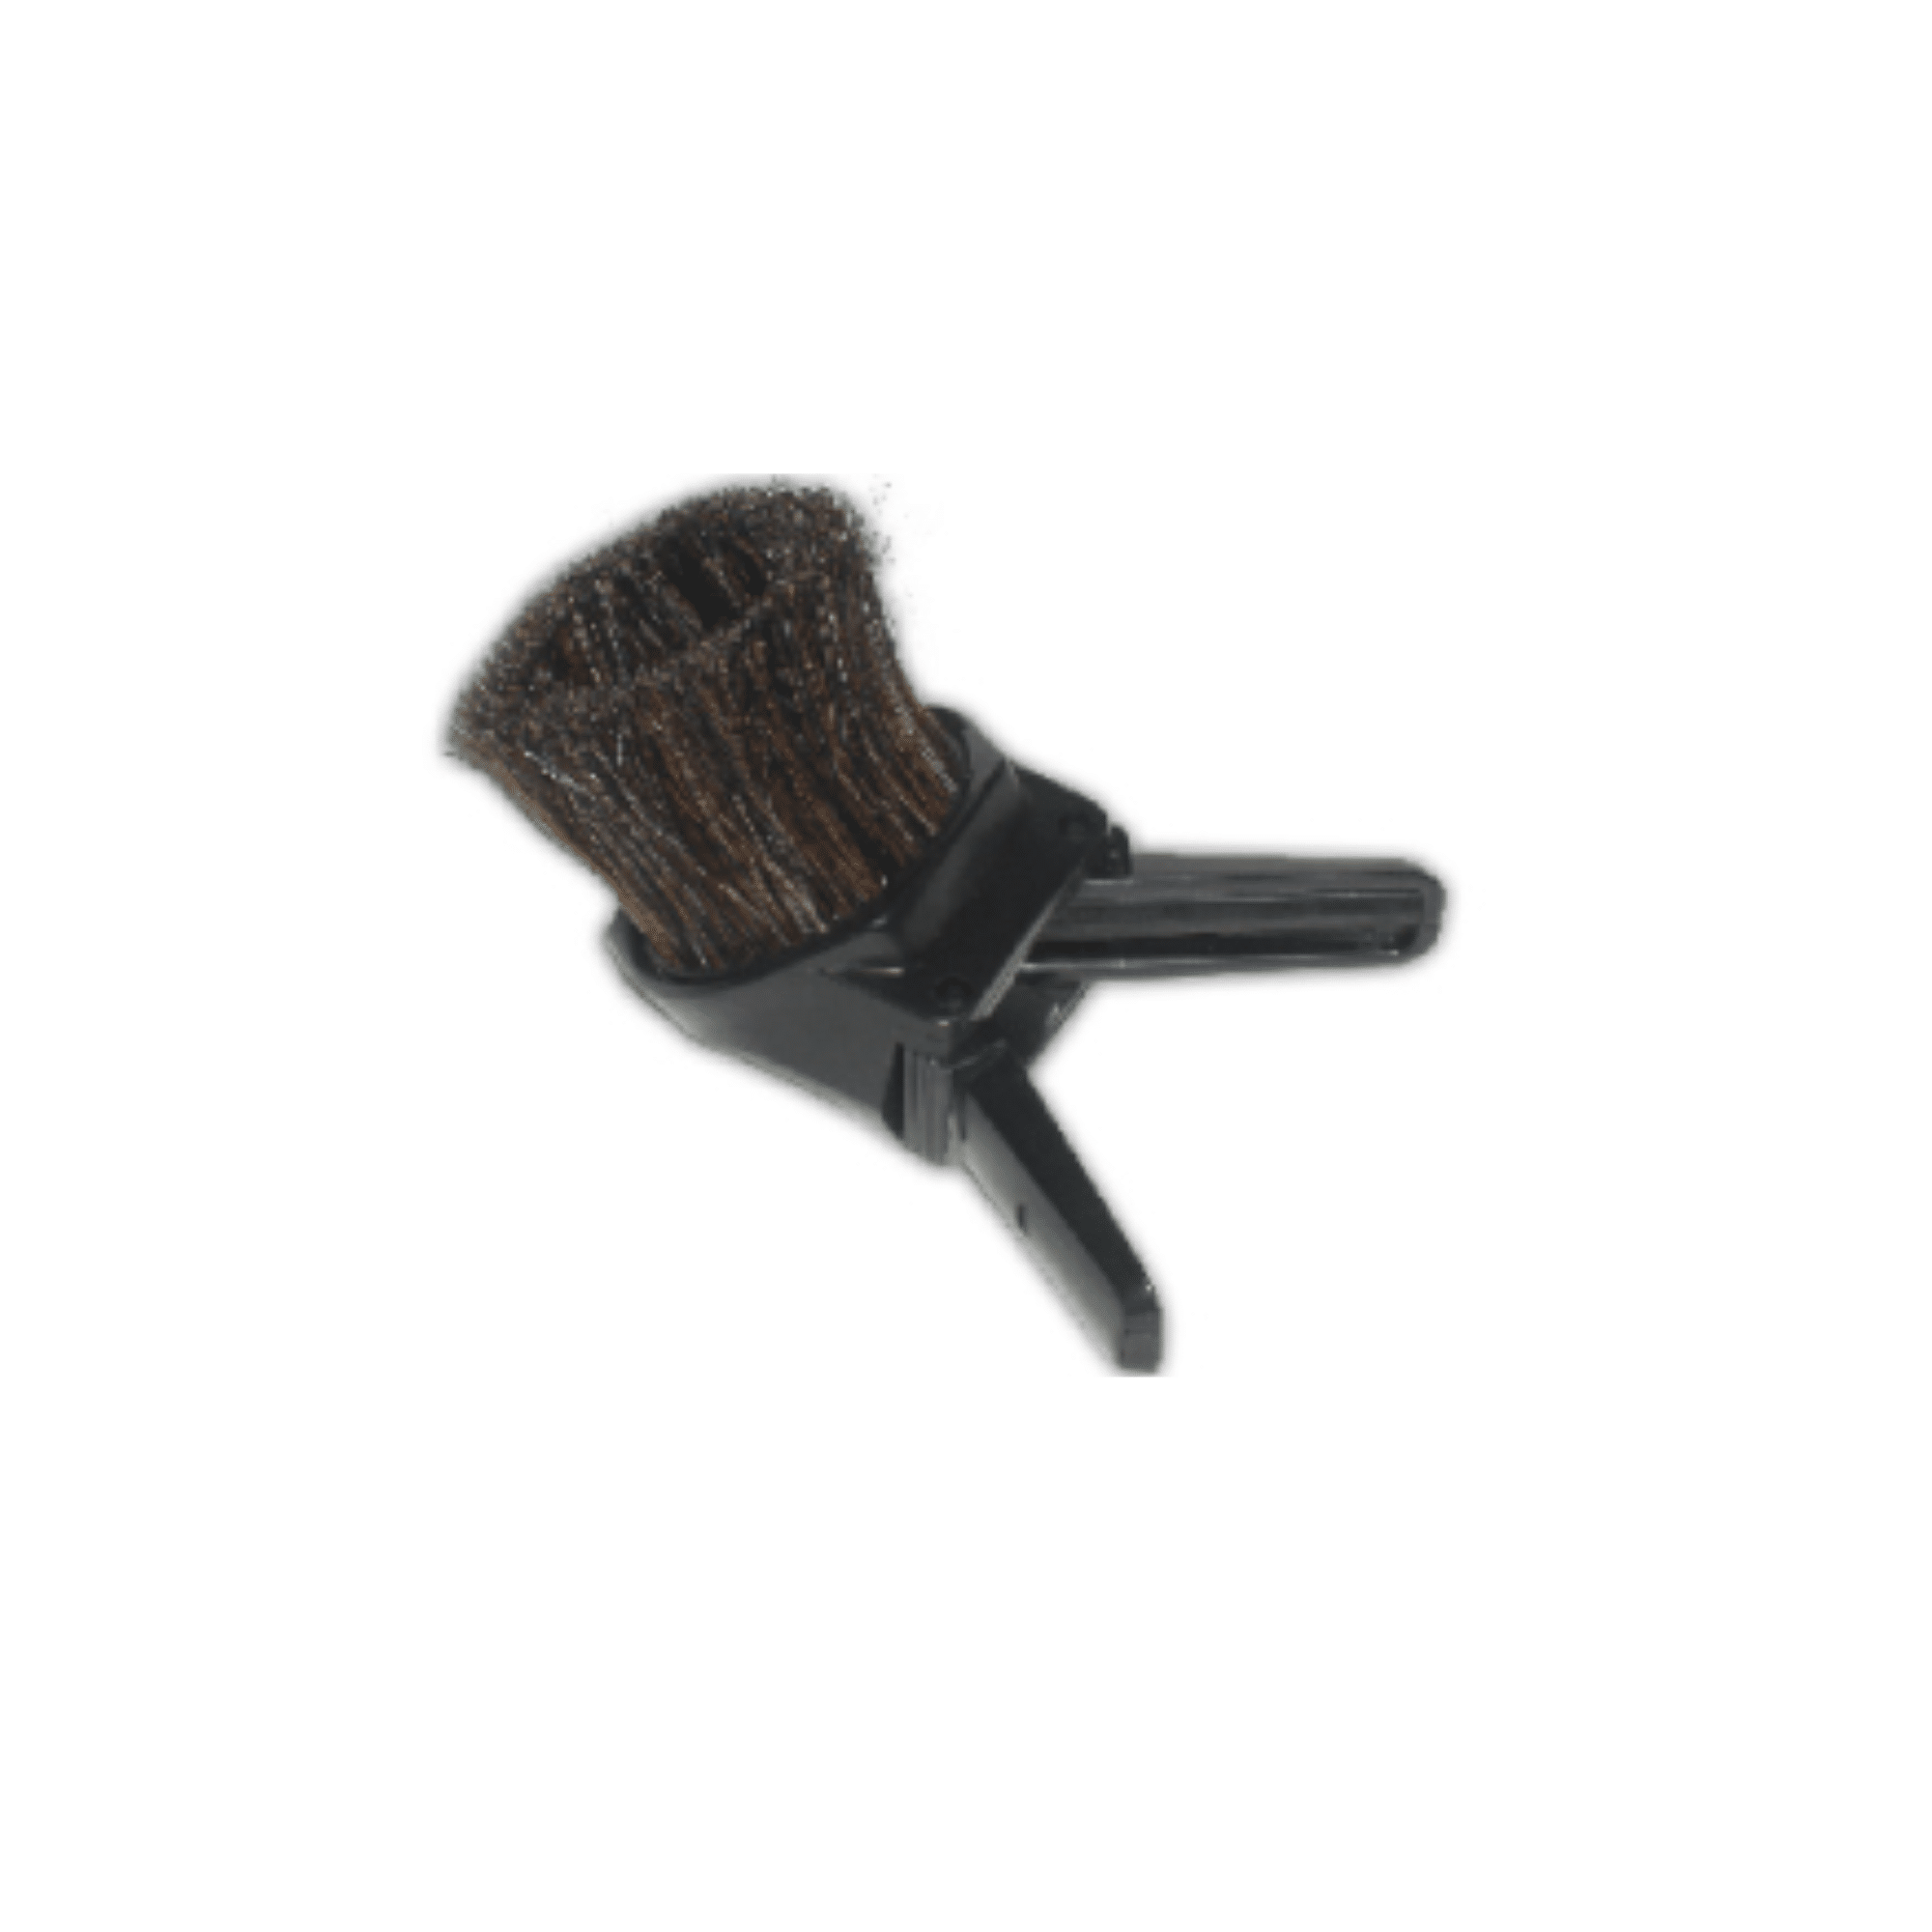 Dust Brush 32mm Horse Hair Tool – Winged – 2 in 1